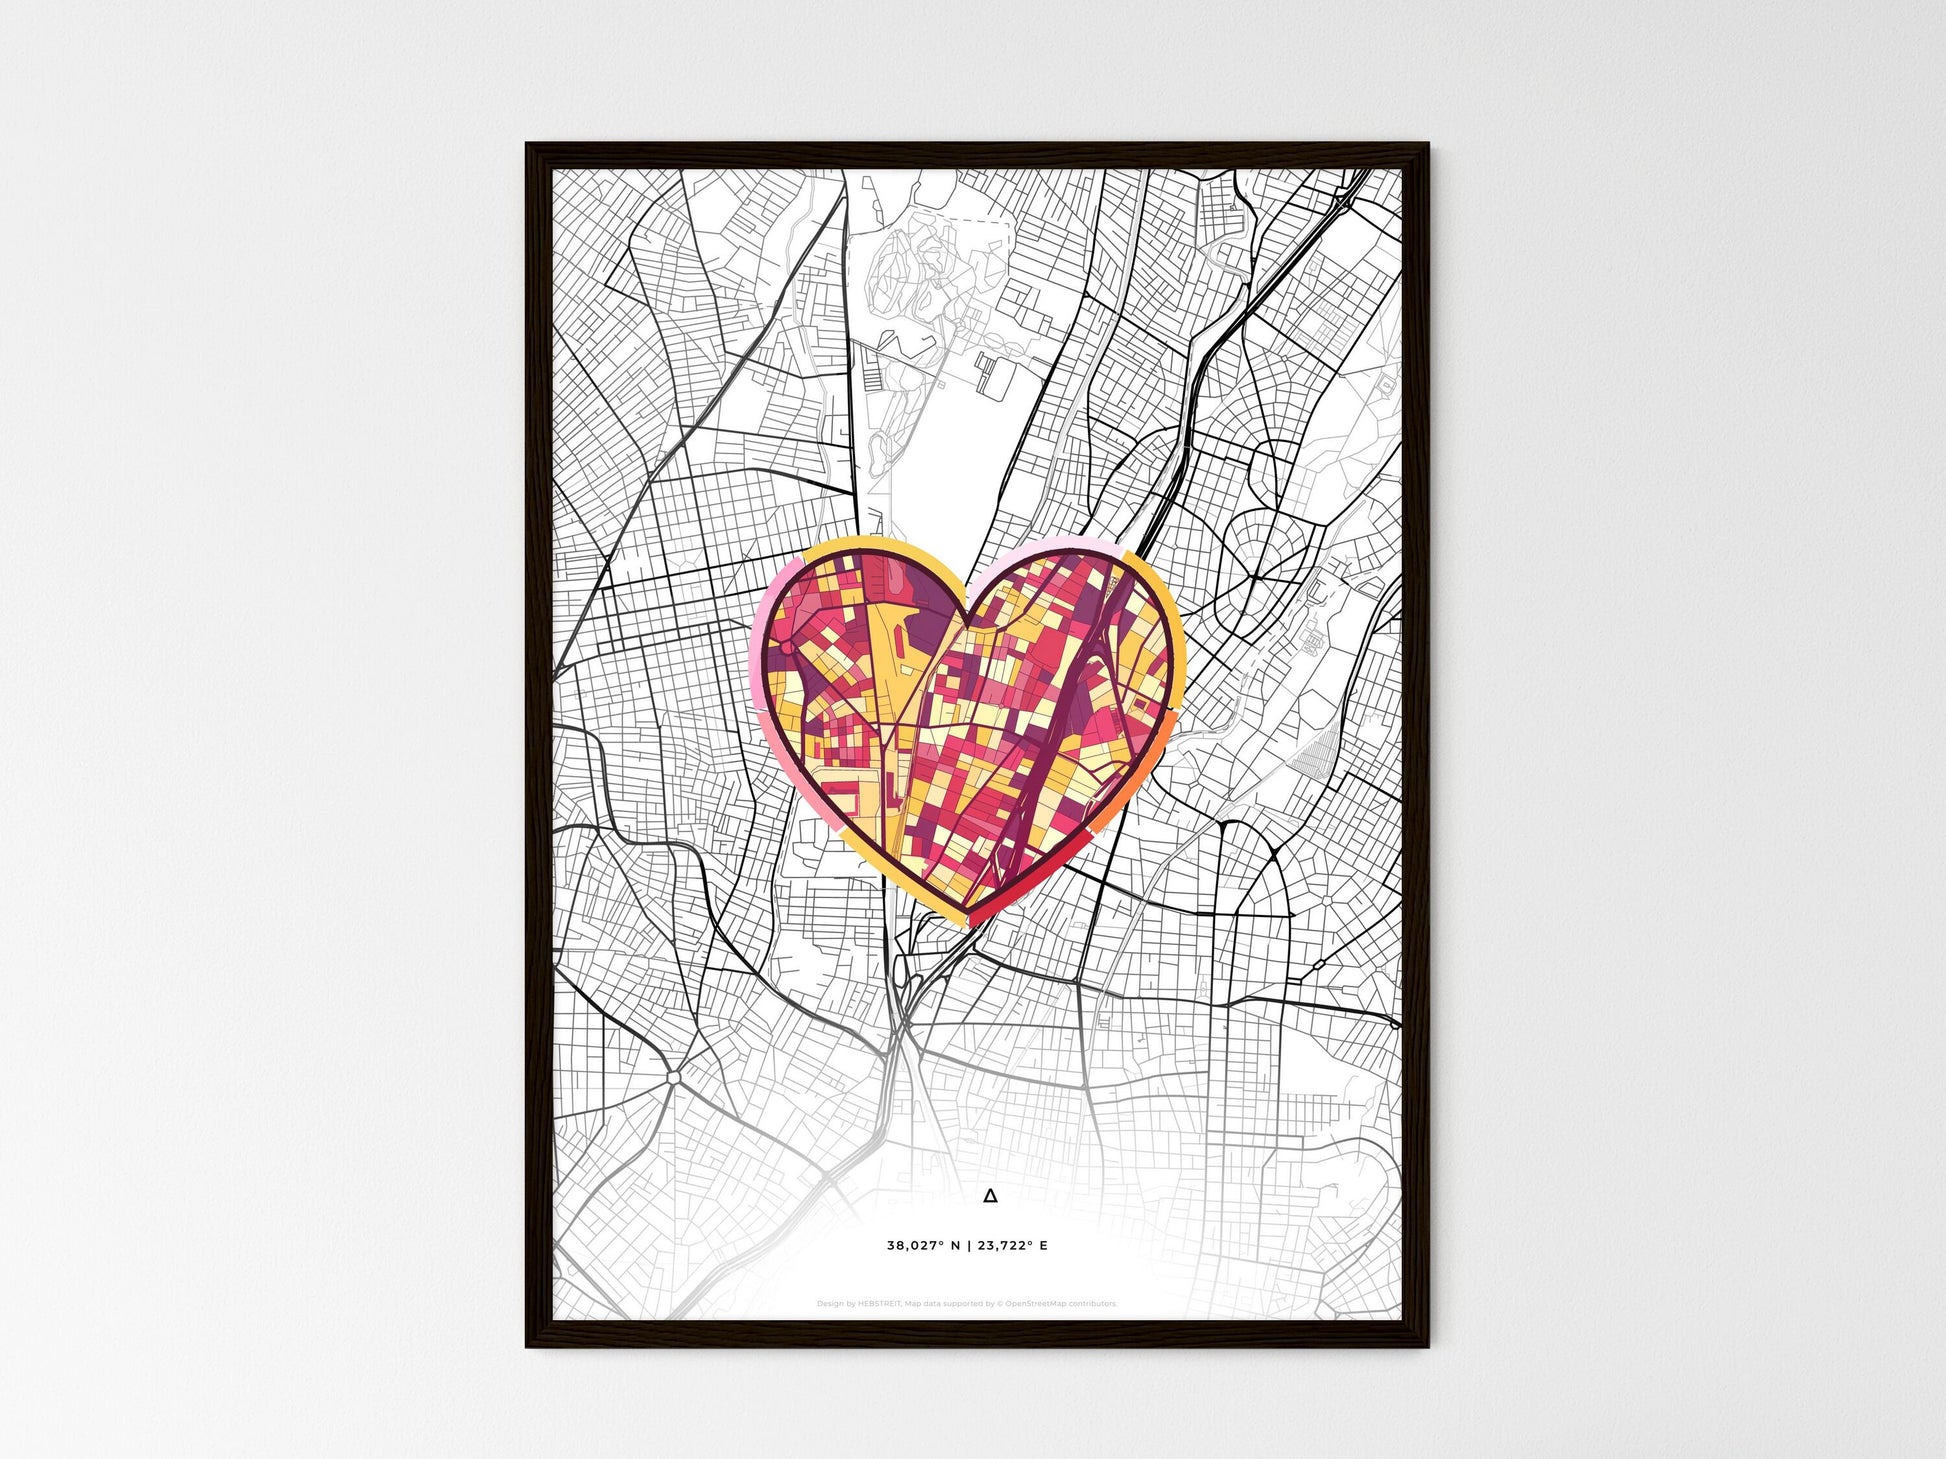 AGIOI ANARGYROI GREECE minimal art map with a colorful icon. Where it all began, Couple map gift. Style 2